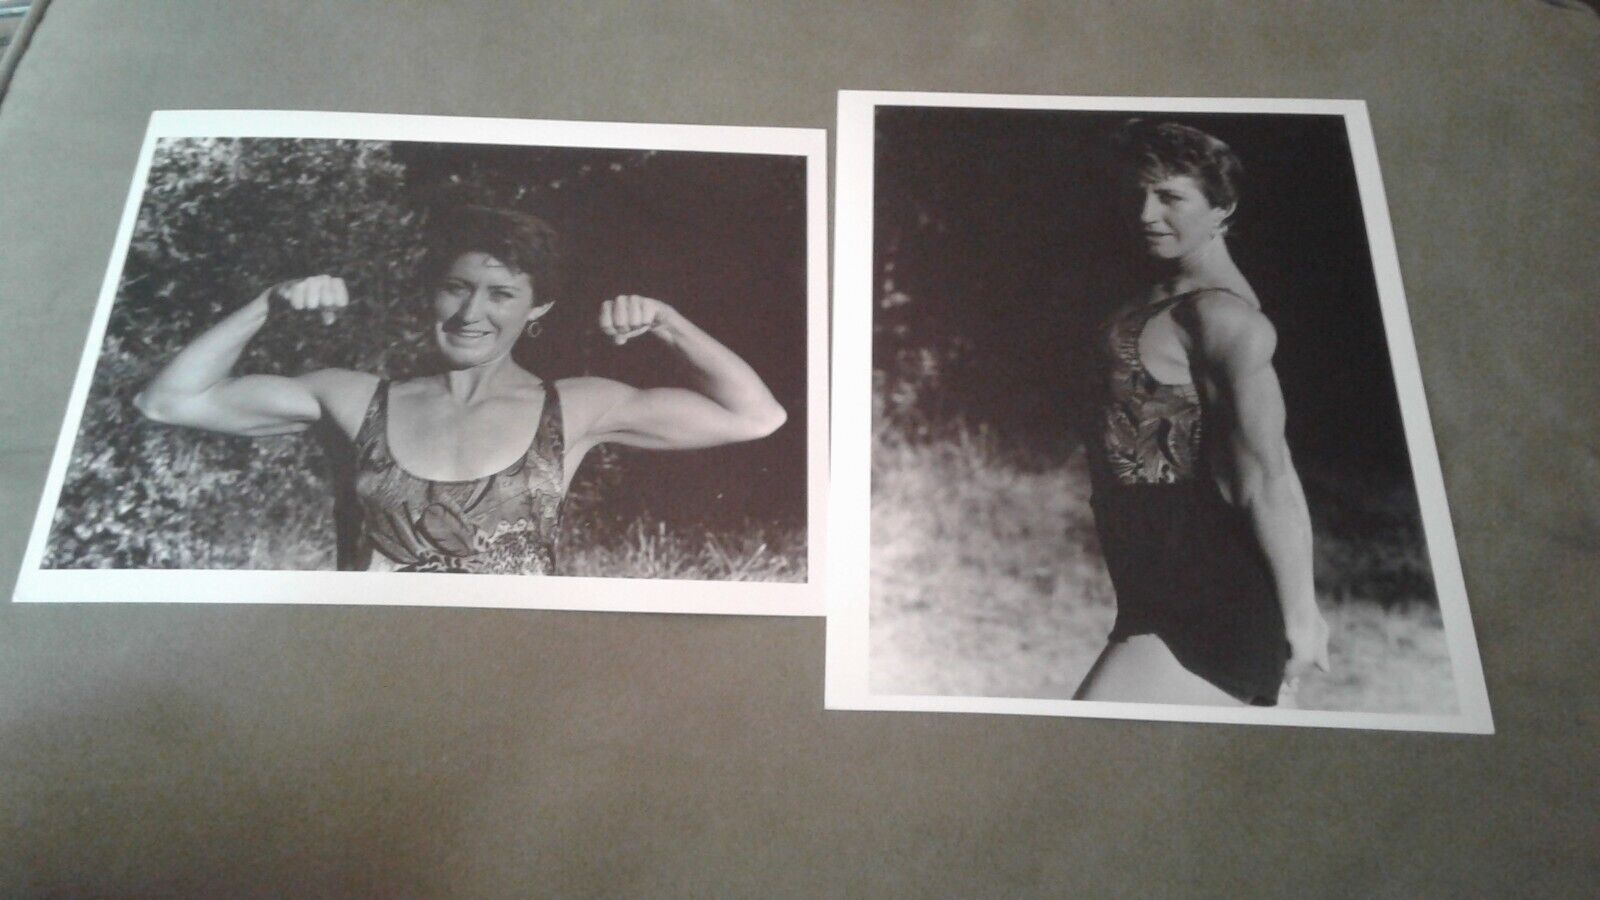 Lot of 2 vintage Black & White 8 X 10 pictures of female athlete/muscles